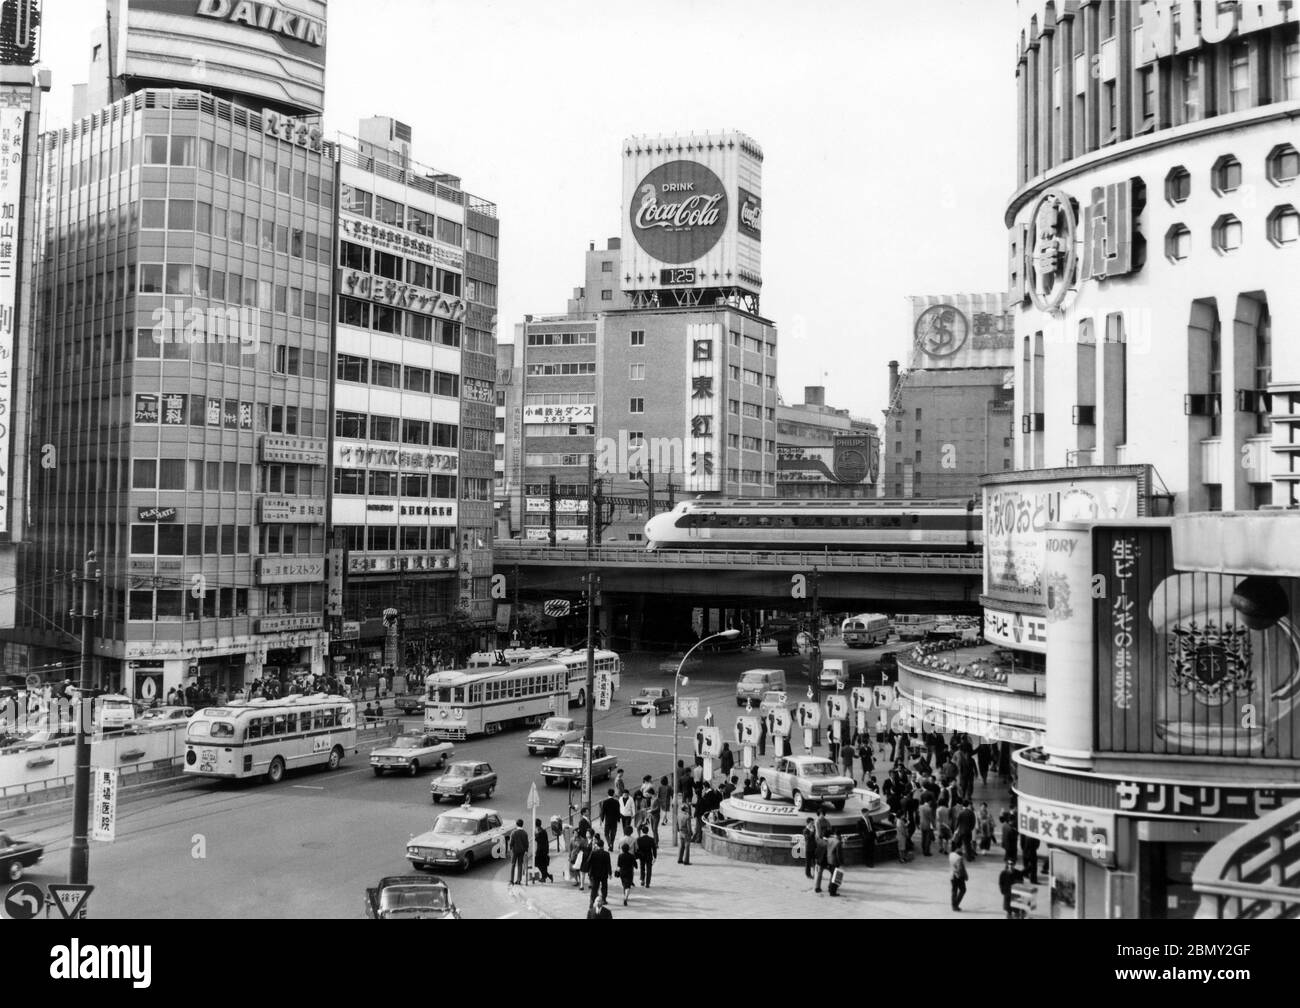 [ 1960s Japan - Yuraku-cho, Tokyo ] —   Taxis, buses and streetcars pass in front of the Nihon Gekijo (日本劇場) in Yuraku-cho (有楽町) in Chiyoda-ku, Tokyo in 1967 (Showa 42).  In the back, a new 0 series Shinkansen 'Bullet Train' can be seen.  The Tokaido Shinkansen began service on October 1, 1964 (Showa 39), just in time for the first Tokyo Olympics.  20th century gelatin silver print. Stock Photo